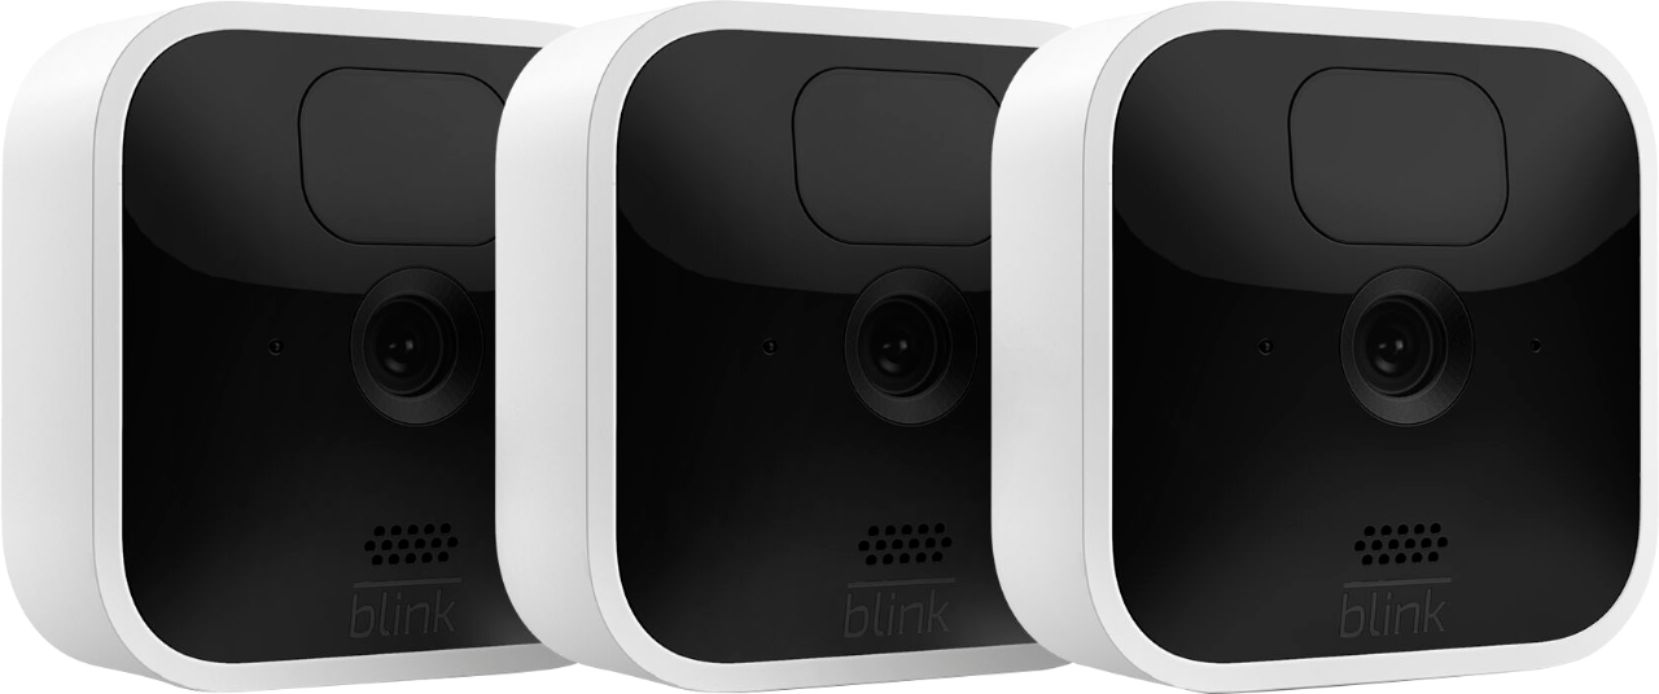 Tech Review: Blink Home Security Camera System 